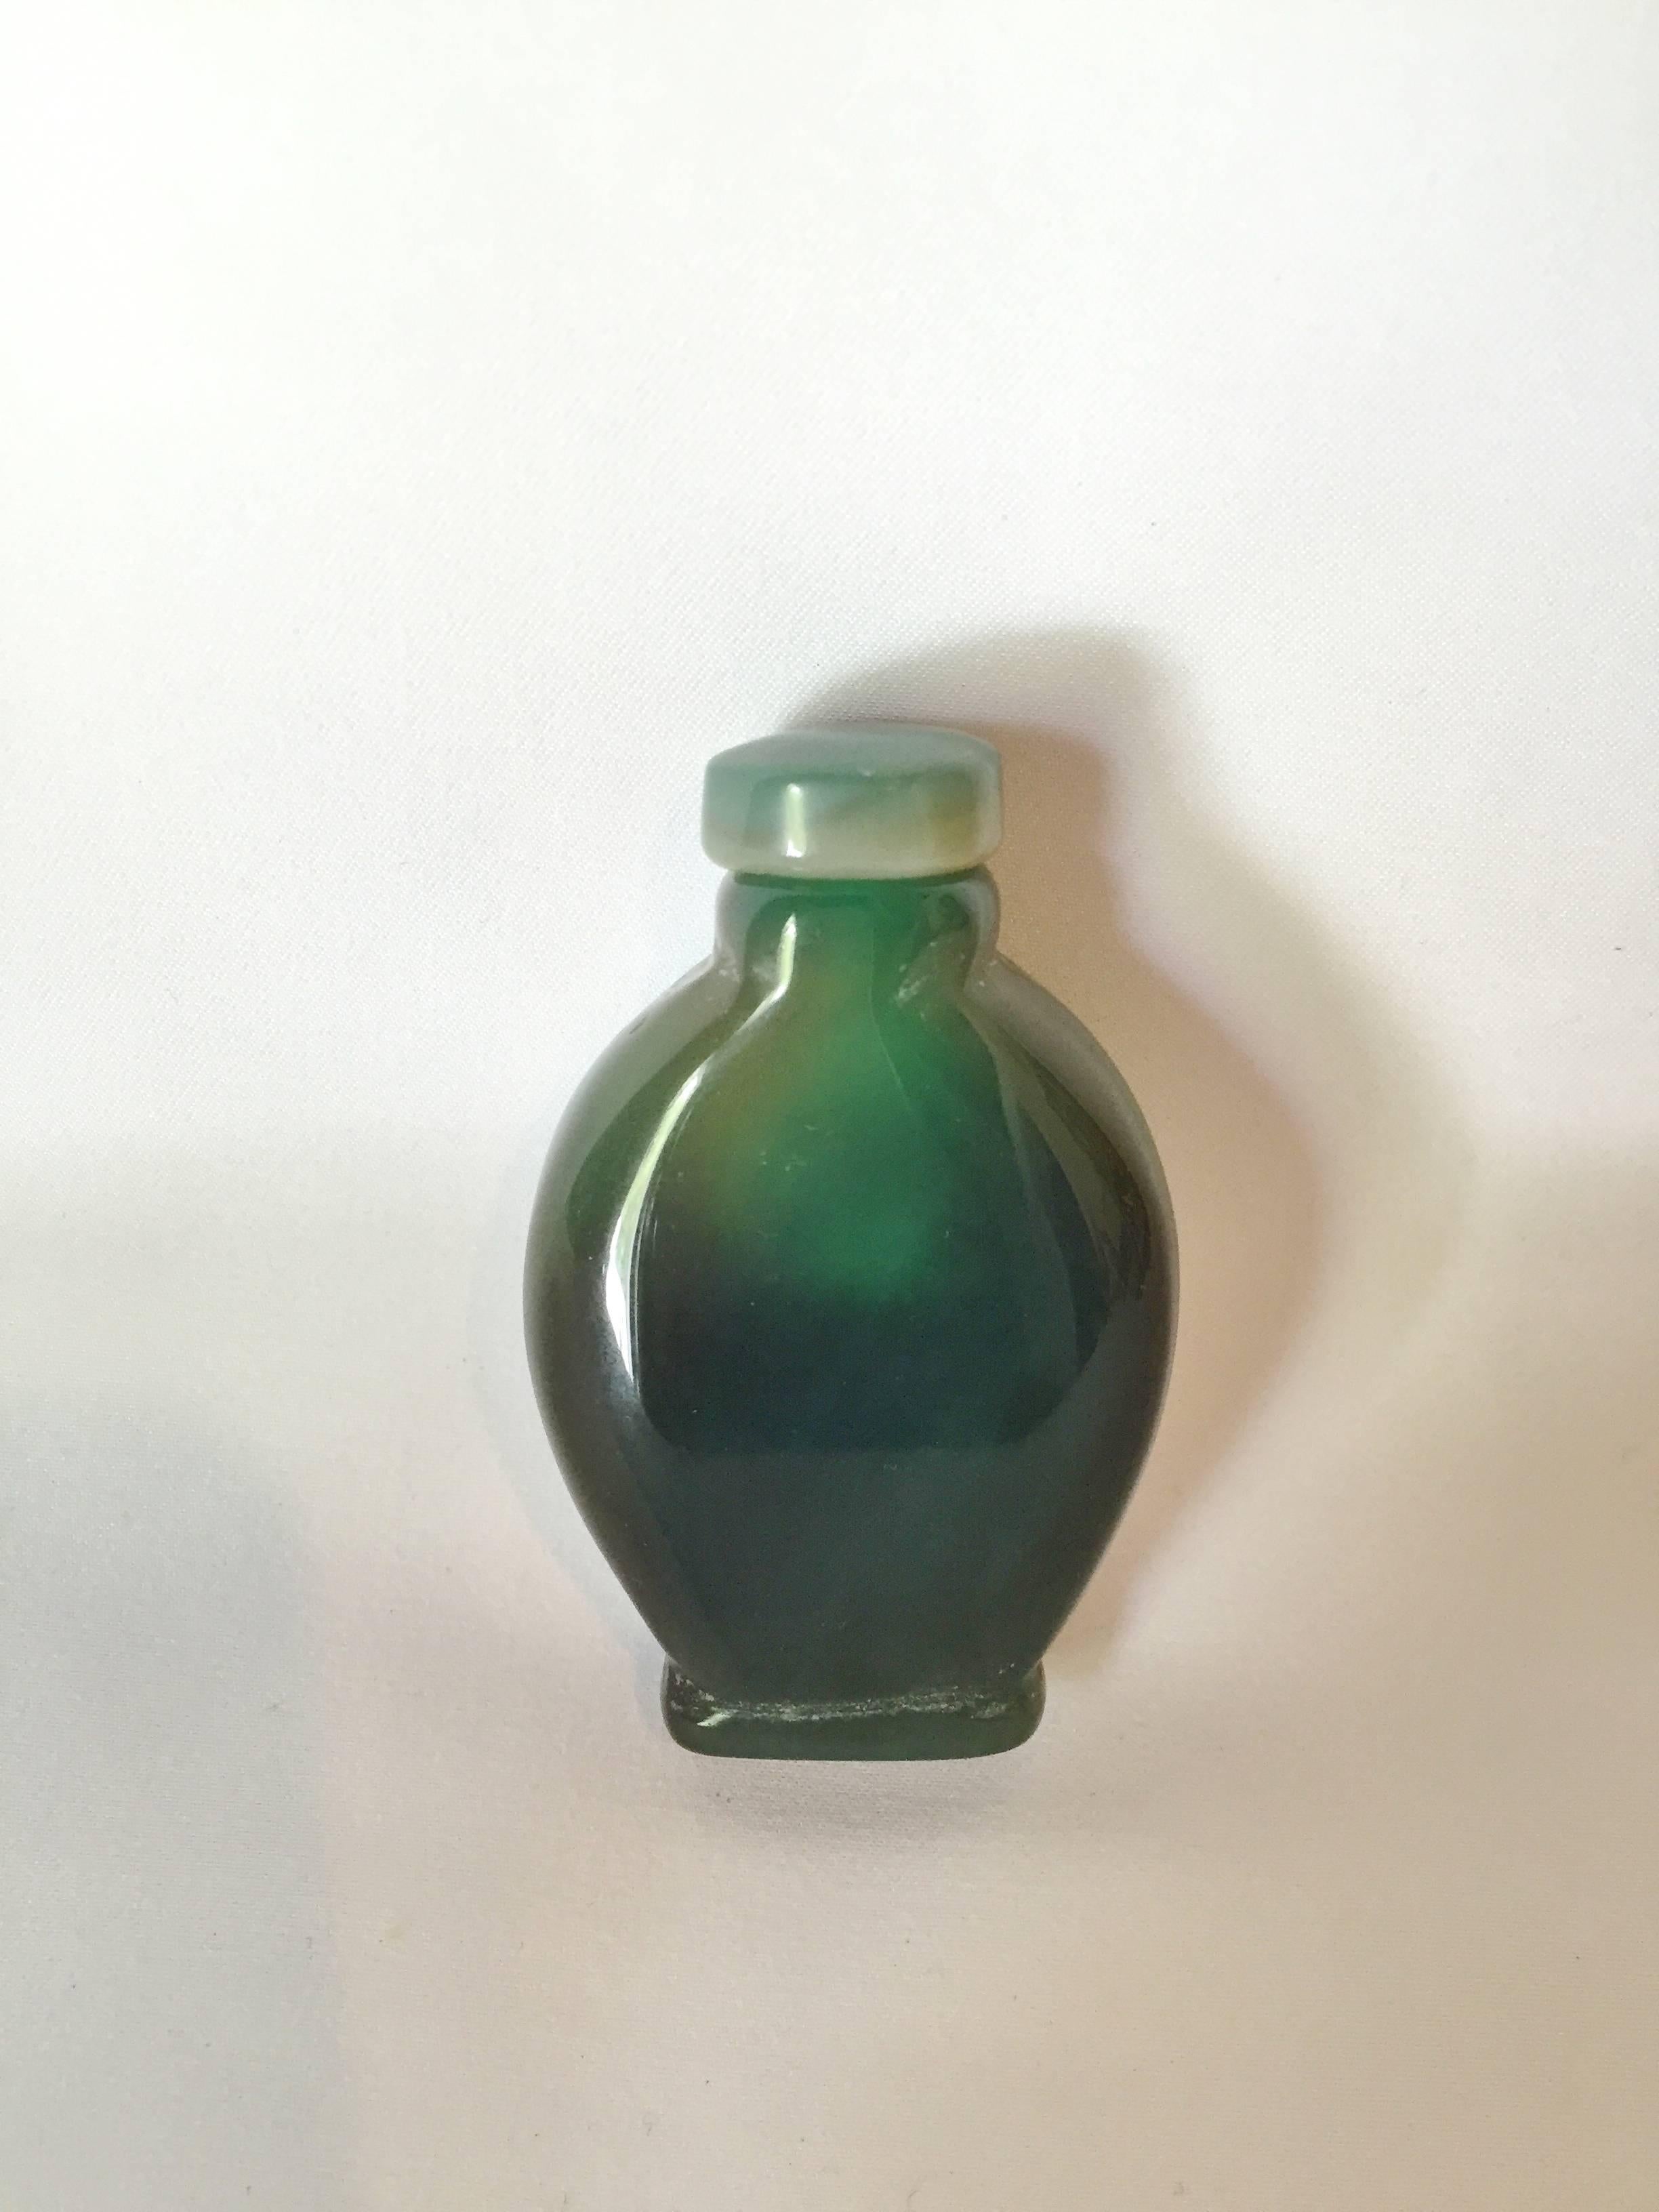 Stunning snuff bottle made with the most beautiful, rare, green chalcedony agate. The variations in the color are mysterious and very romantic. This is stone, not Peking class, with beautiful swirls of emerald colors. The stone turns grey and